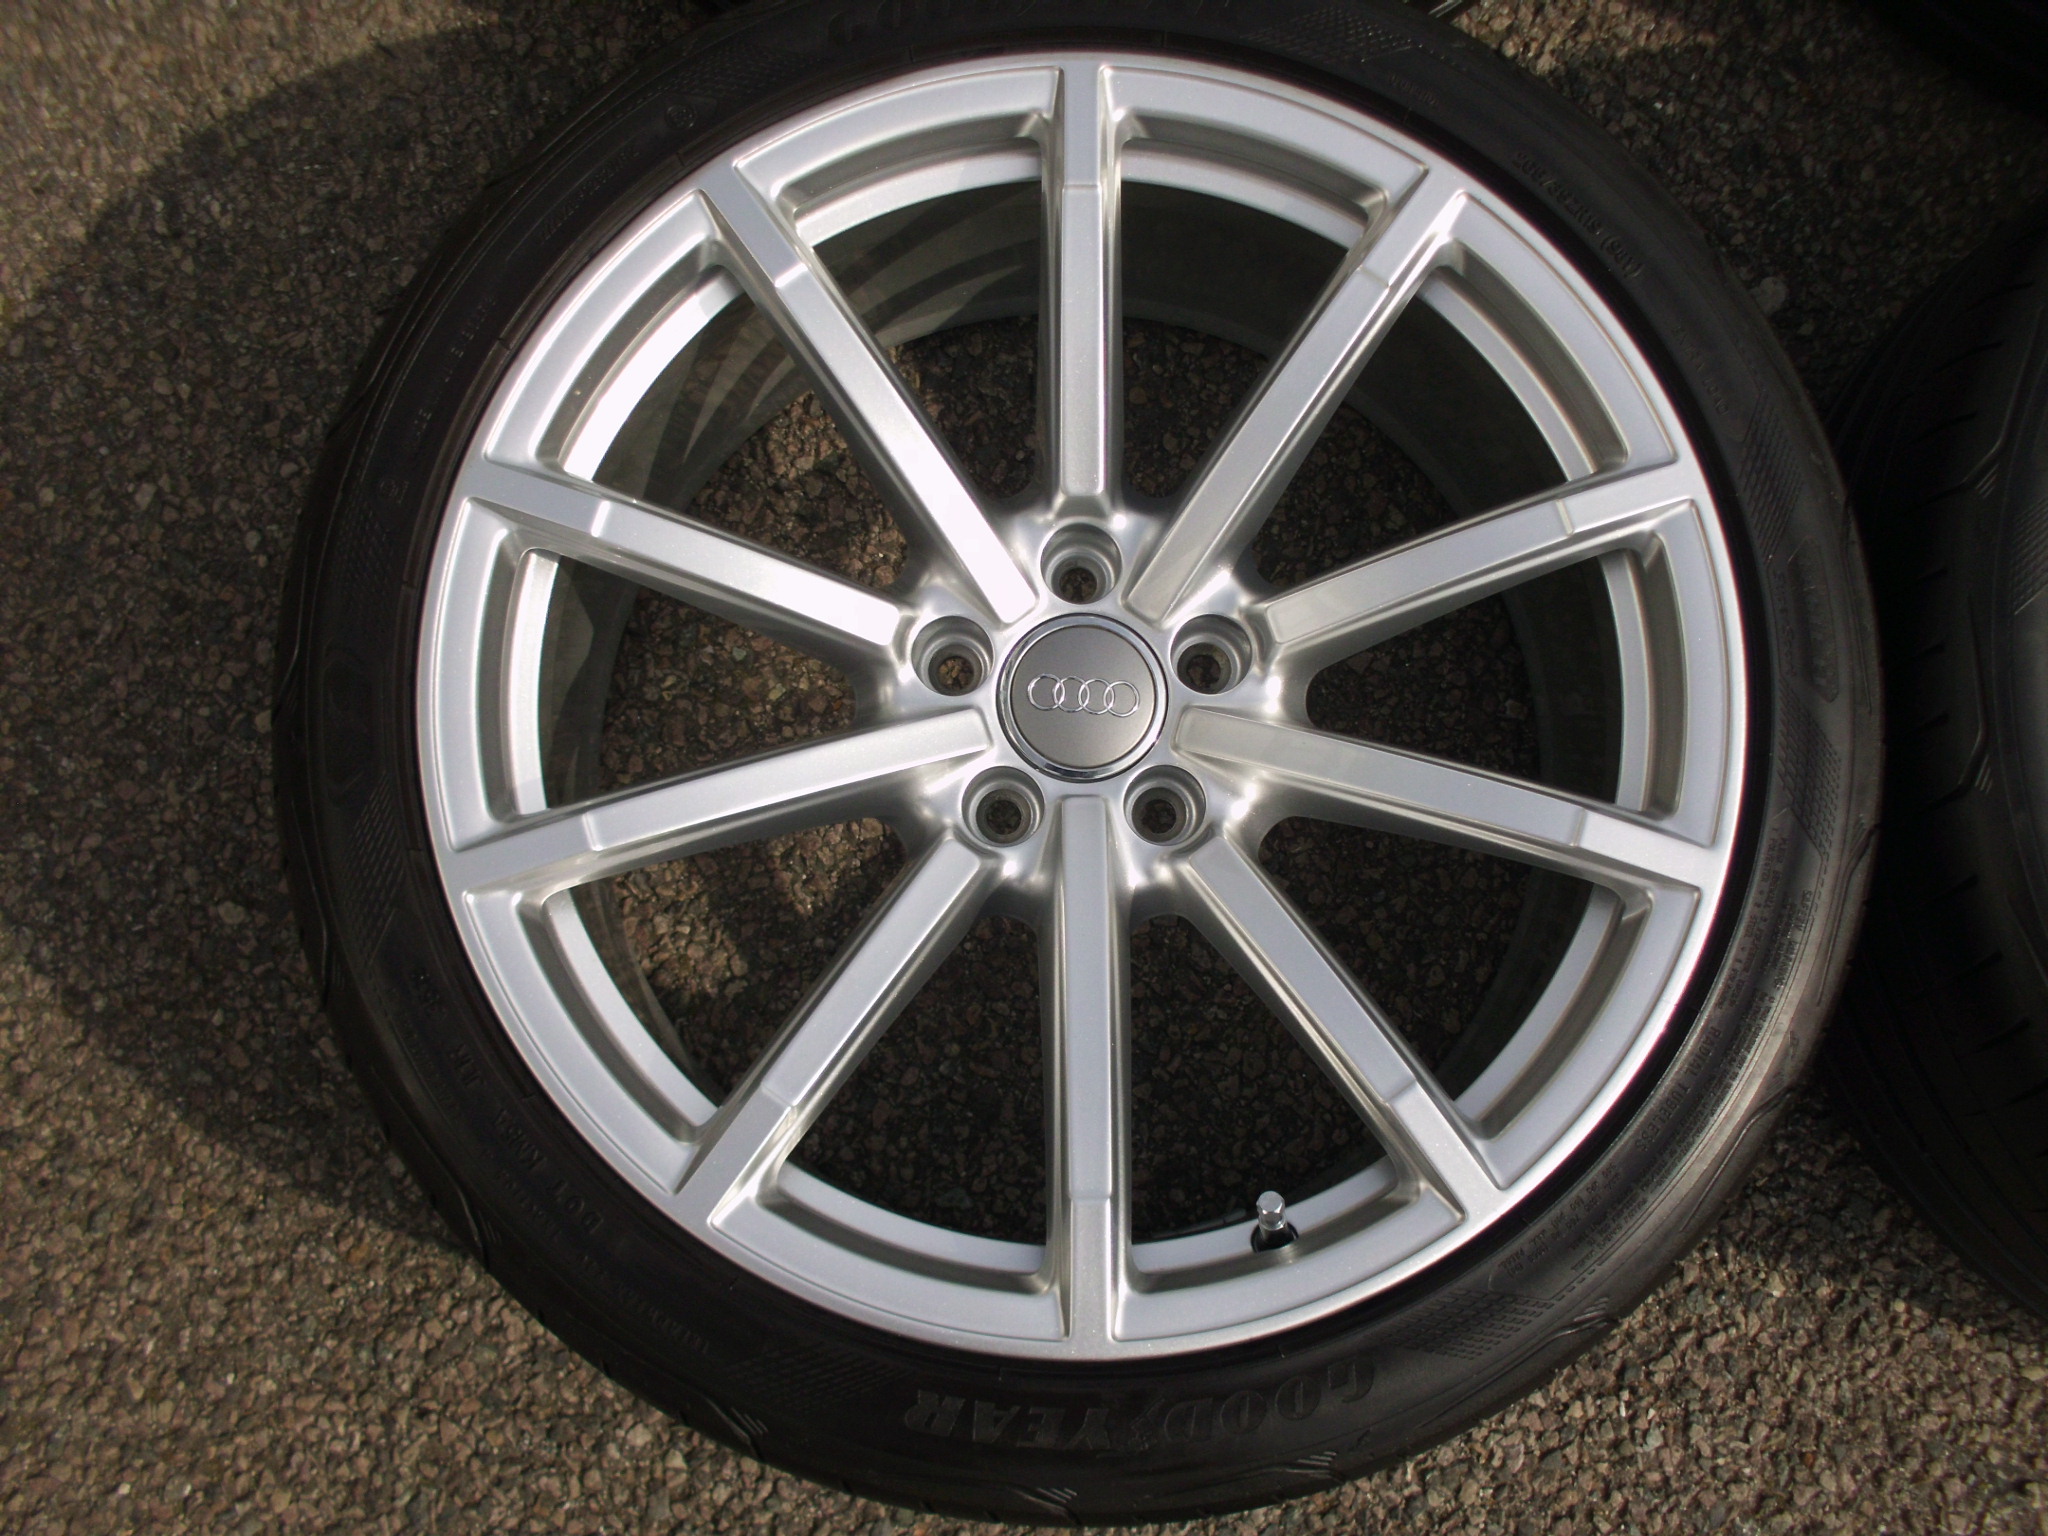 USED 19" GENUINE AUDI B8 RS4 RS5 ALLOY WHEELS,FULLY REFURBED INC GOODYEAR TYRES, 5X112 9" ET29